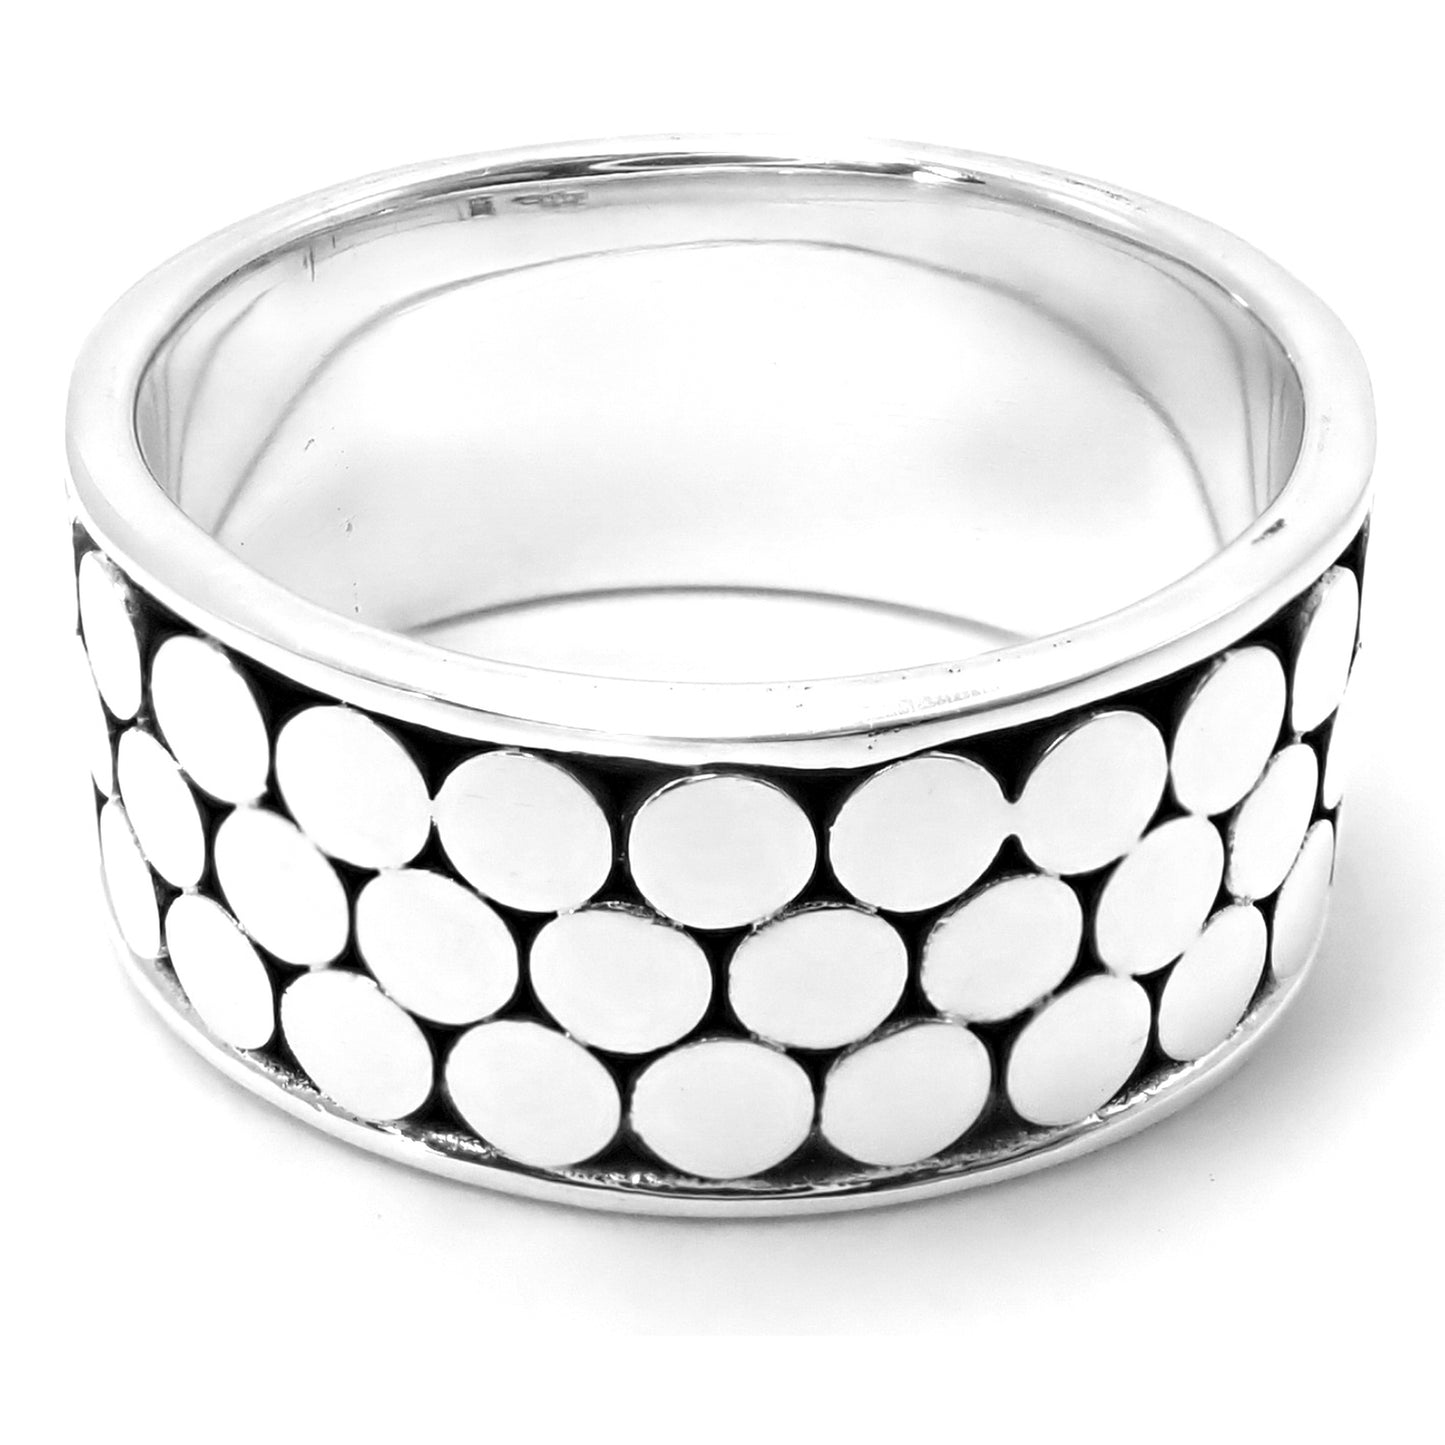 R320 SOHO .925 Sterling Silver Band Ring with Bali Dots